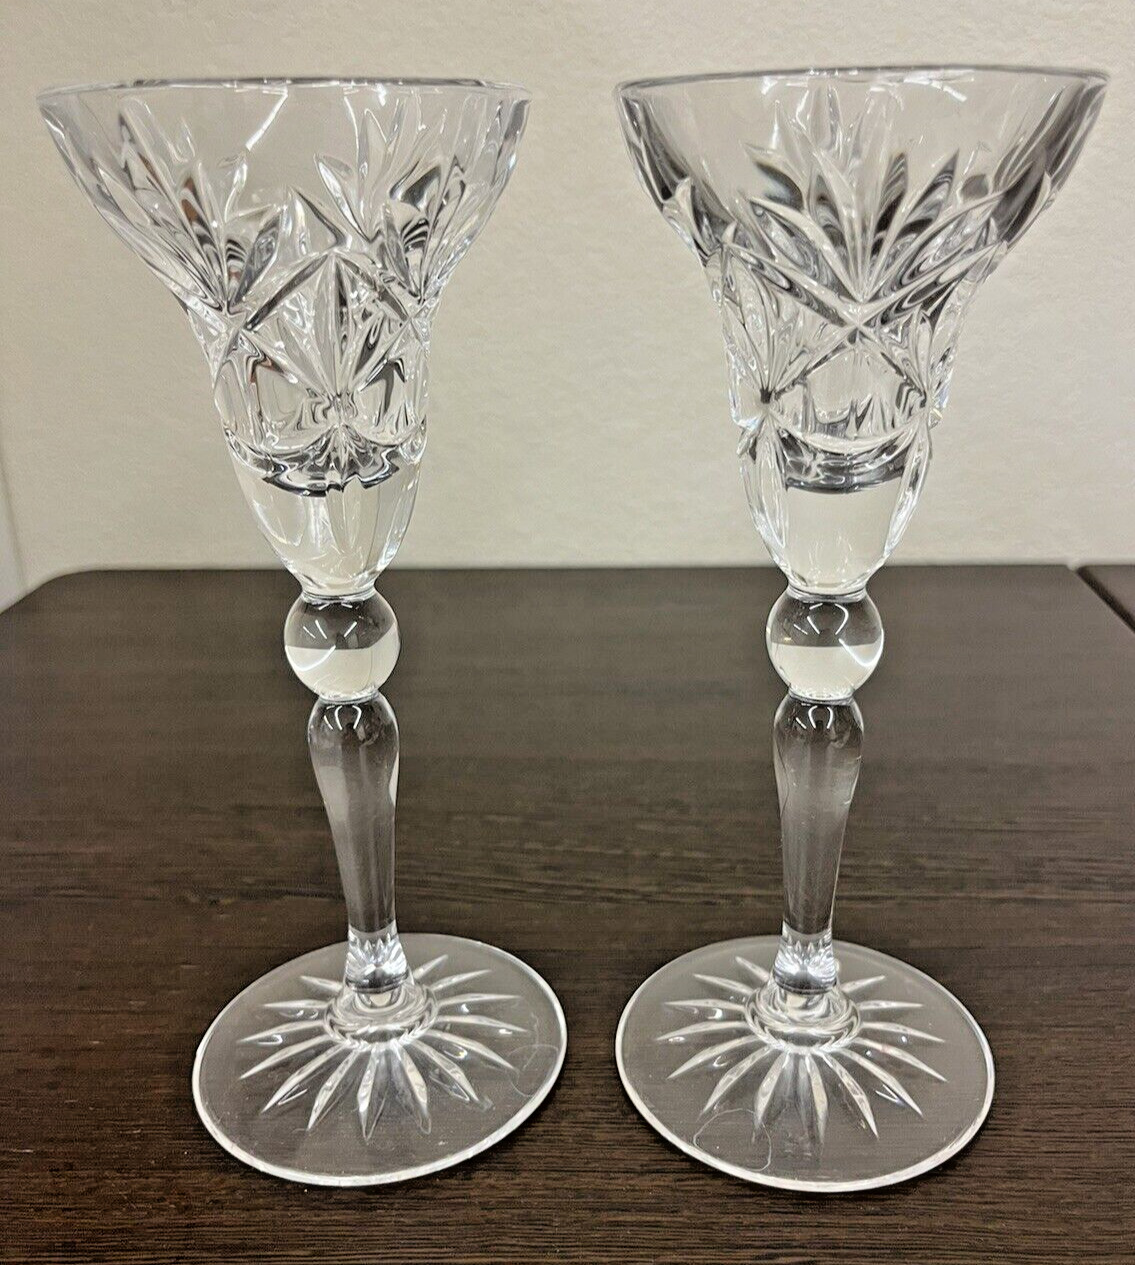 PAIR of 24% Crystal Candle Stick Holders 7'' by Mystique. Vintage.